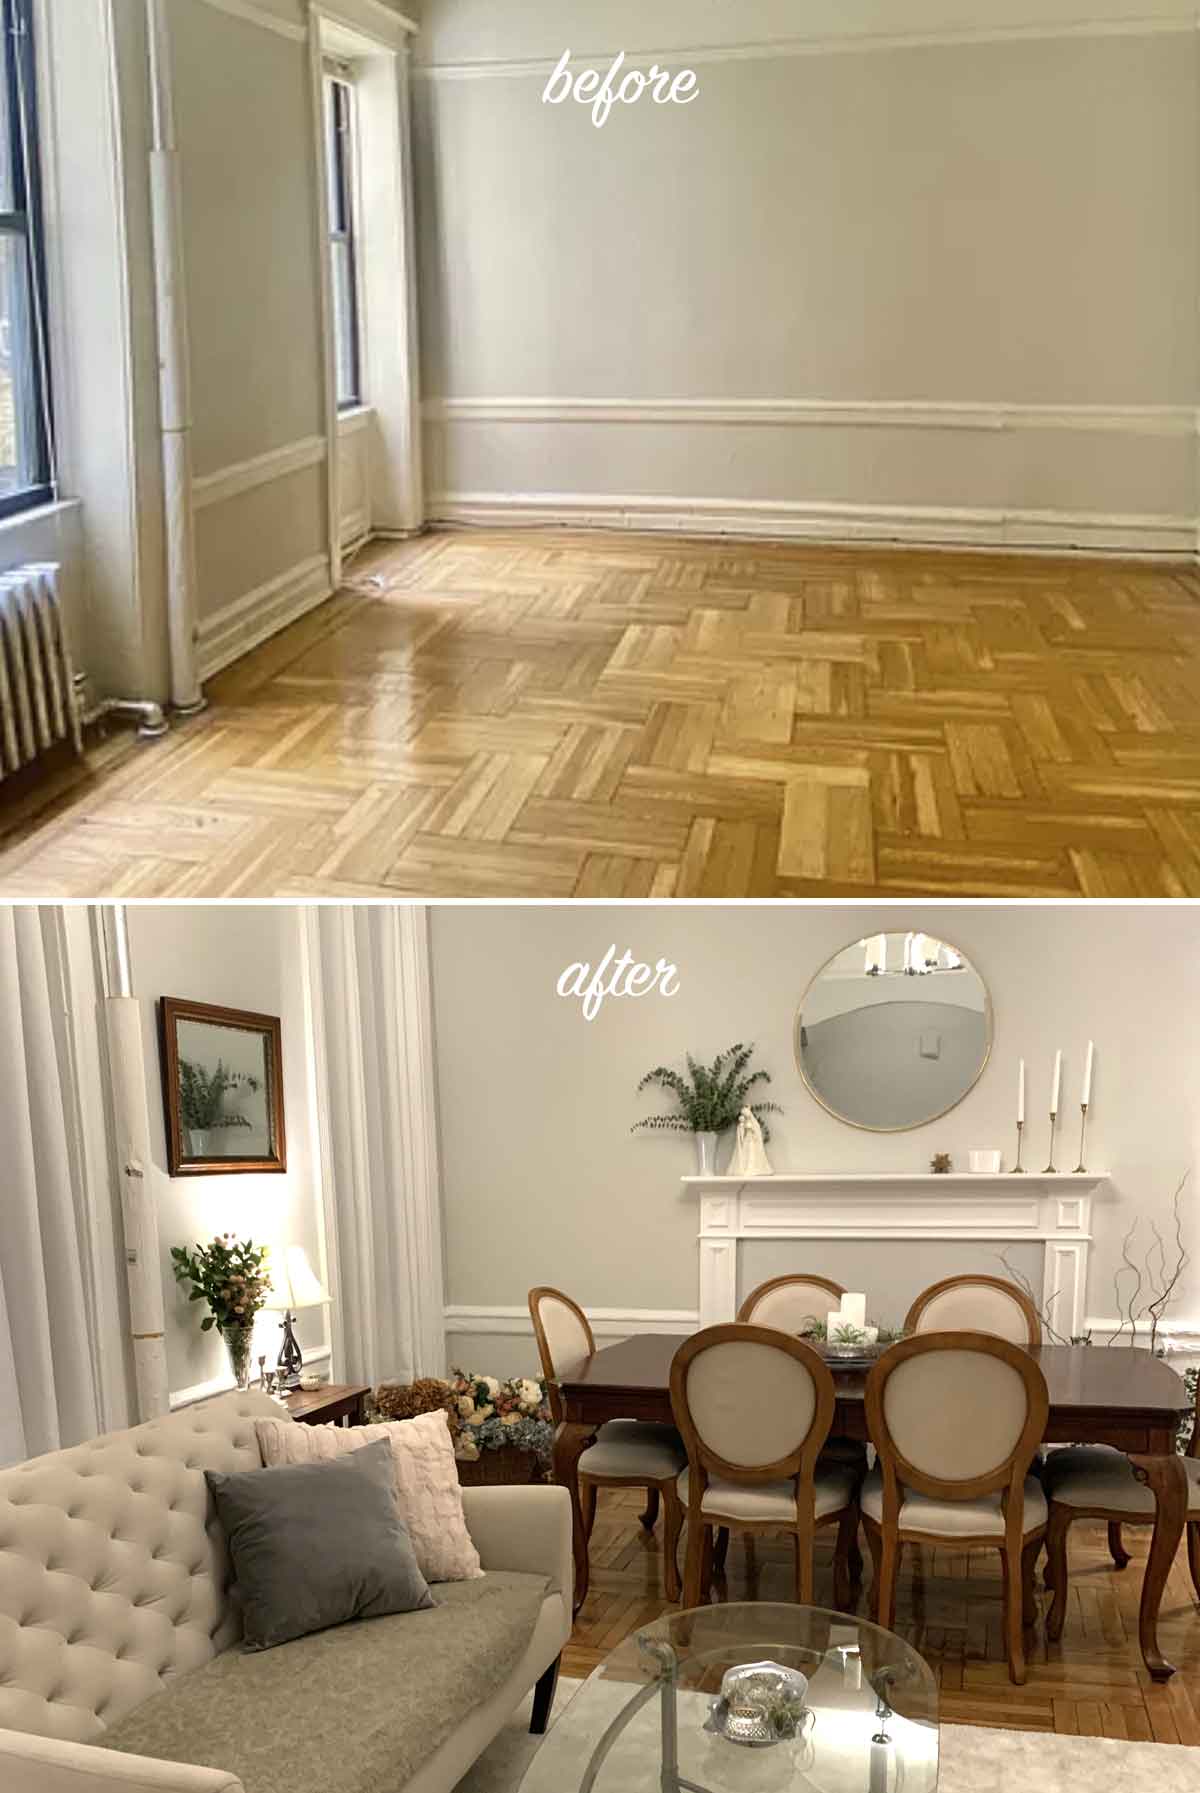 2 images showing the before and after of a decorated room.